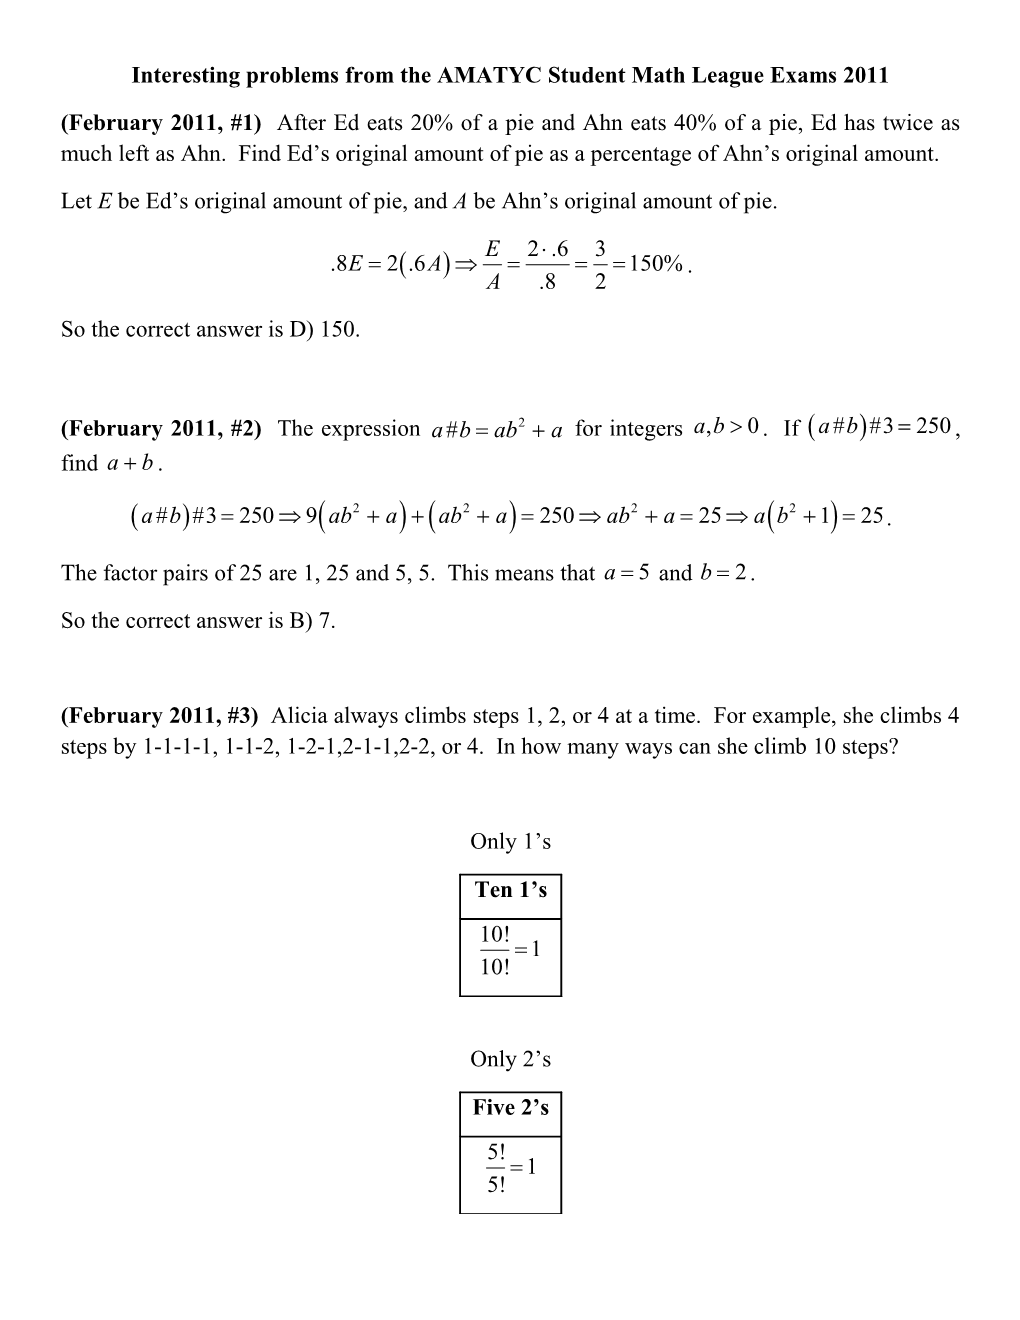 Interesting Problems from the AMATYC Student Math League Exams 2011